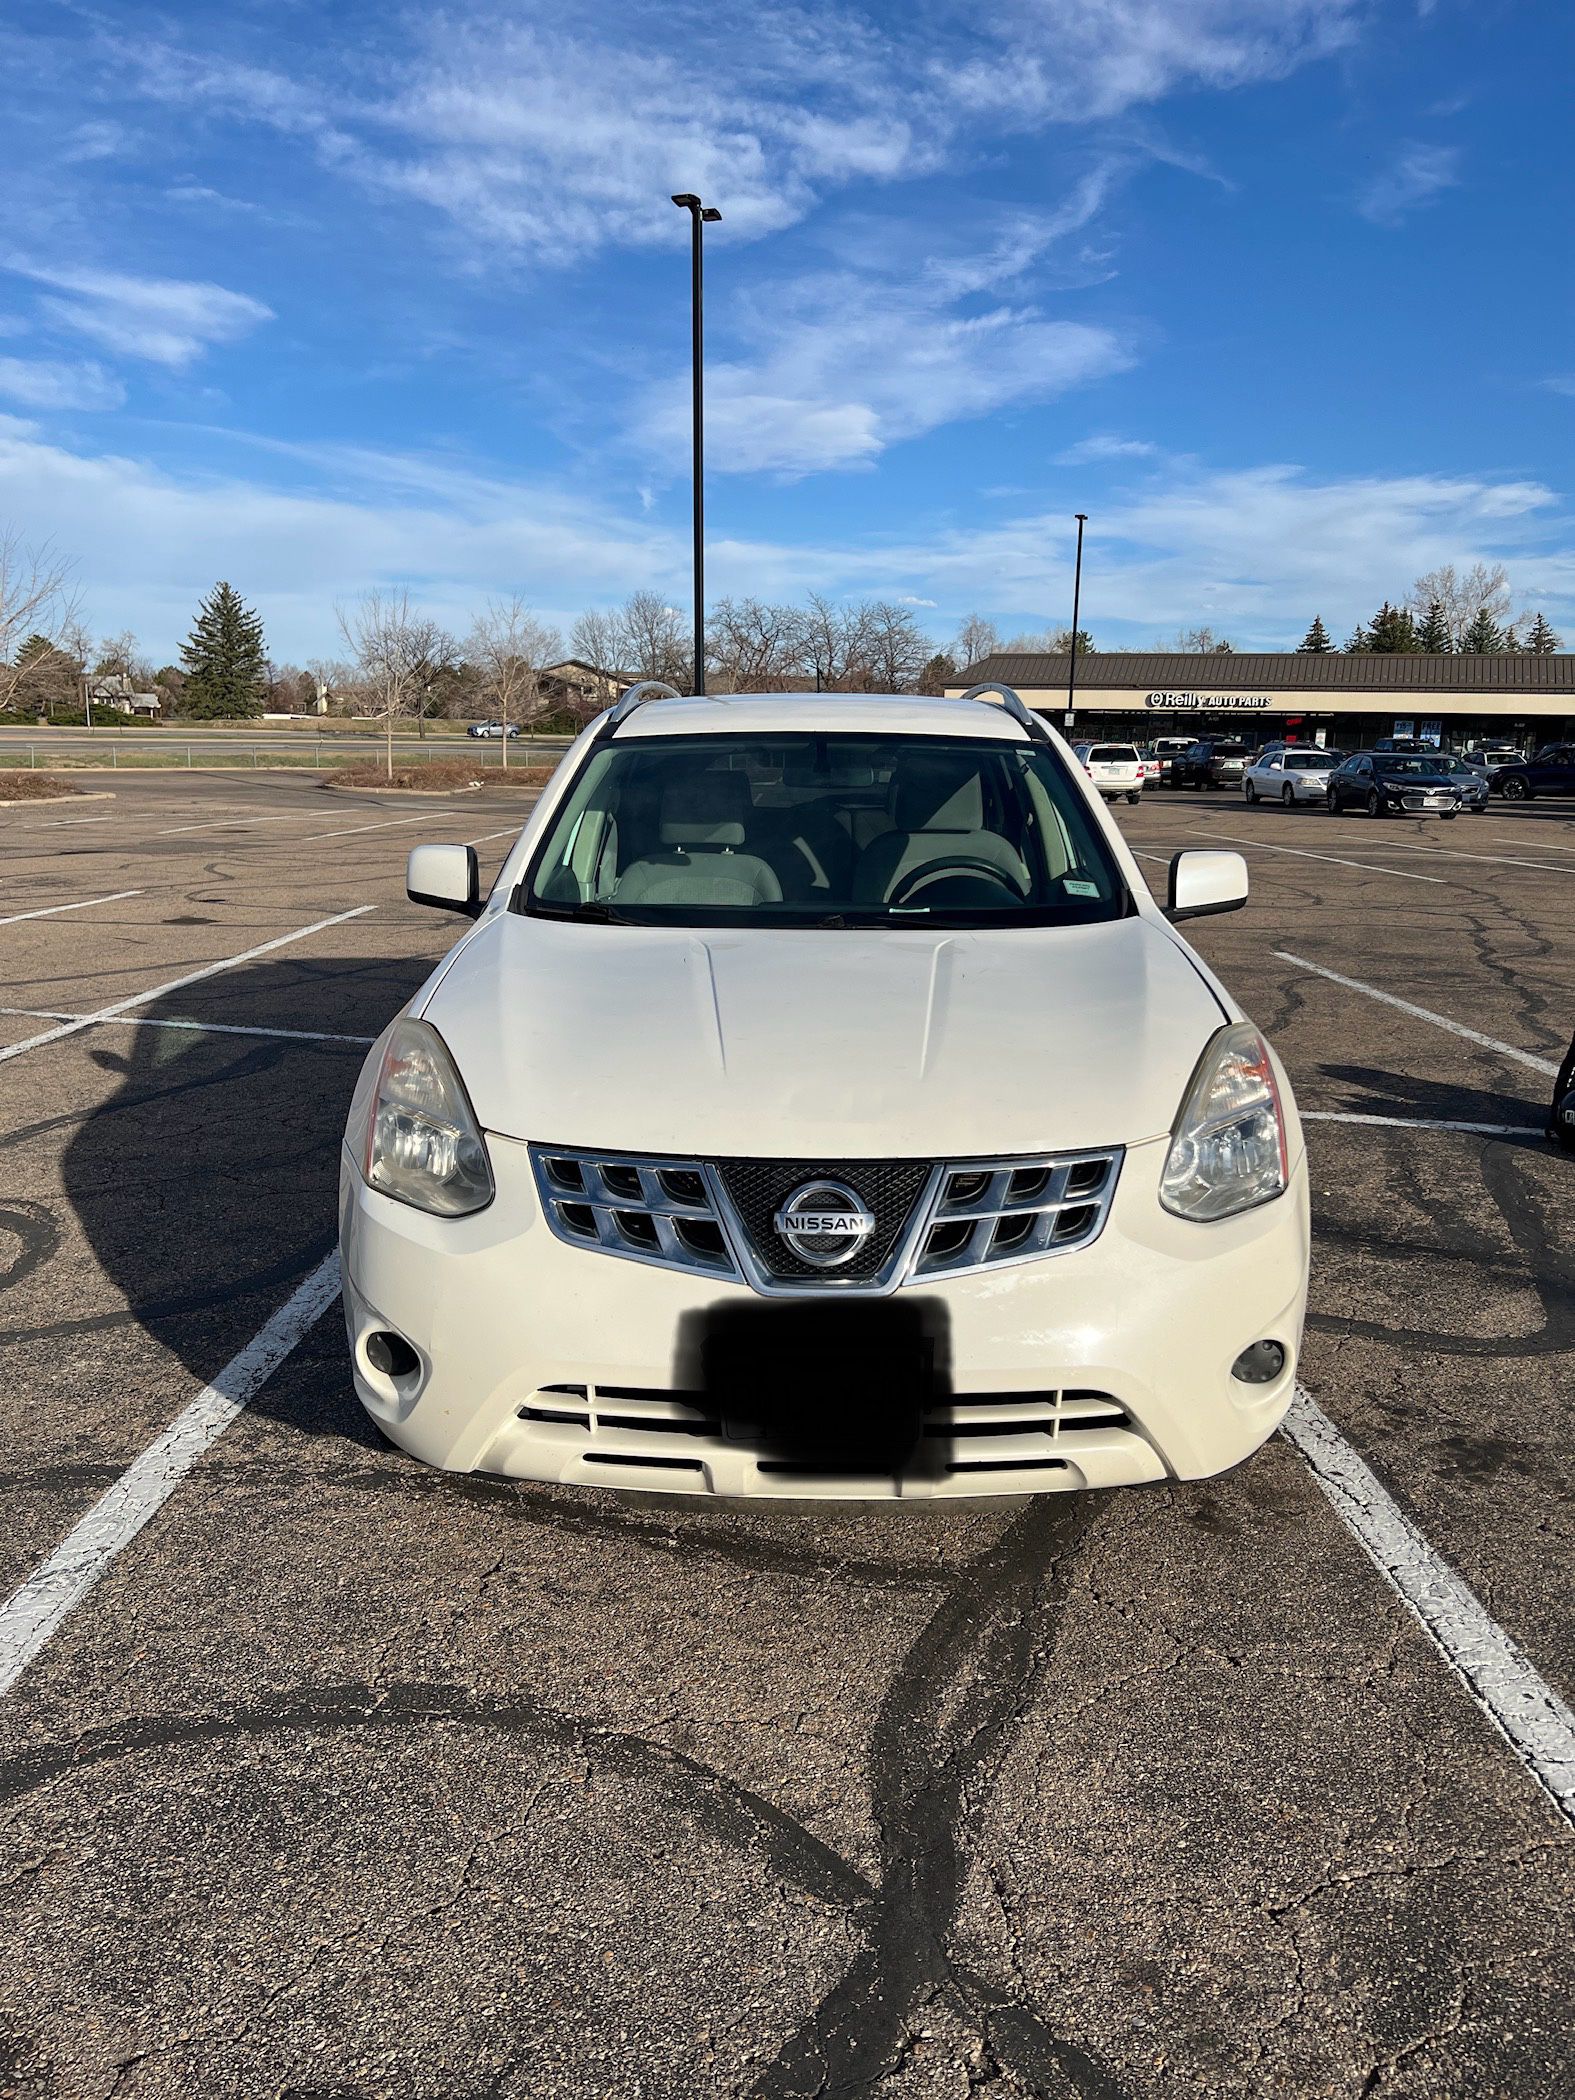 Nissan Rogue White SUV - Clean Title, Wireless Apple CarPlay/Android Auto, Birds Eye View Camera System